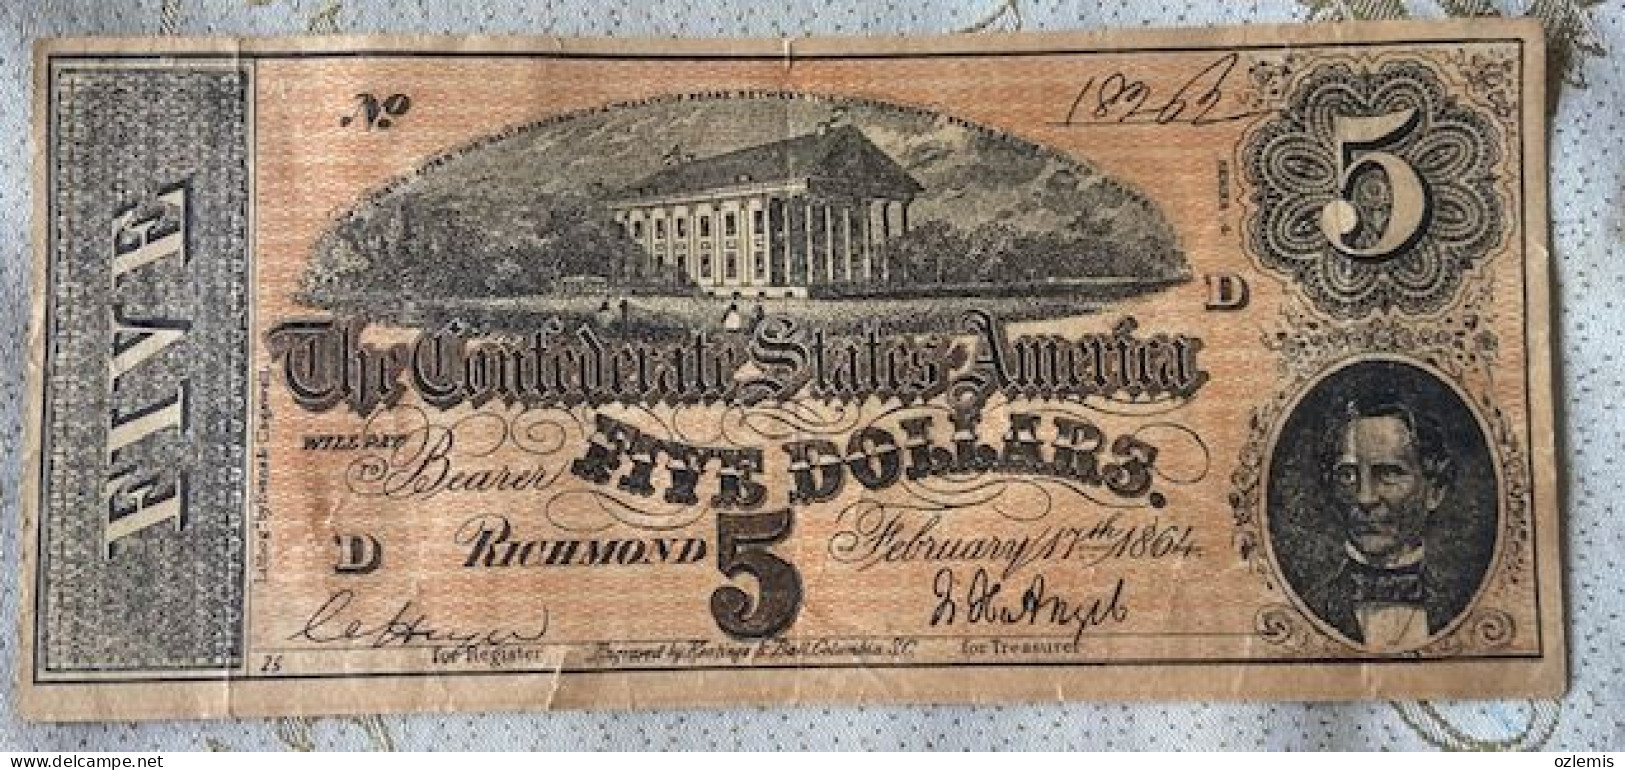 THE CONFEDERATE STATES AMERICA ,FIVE DOLLARS, 1864 - Confederate Currency (1861-1864)